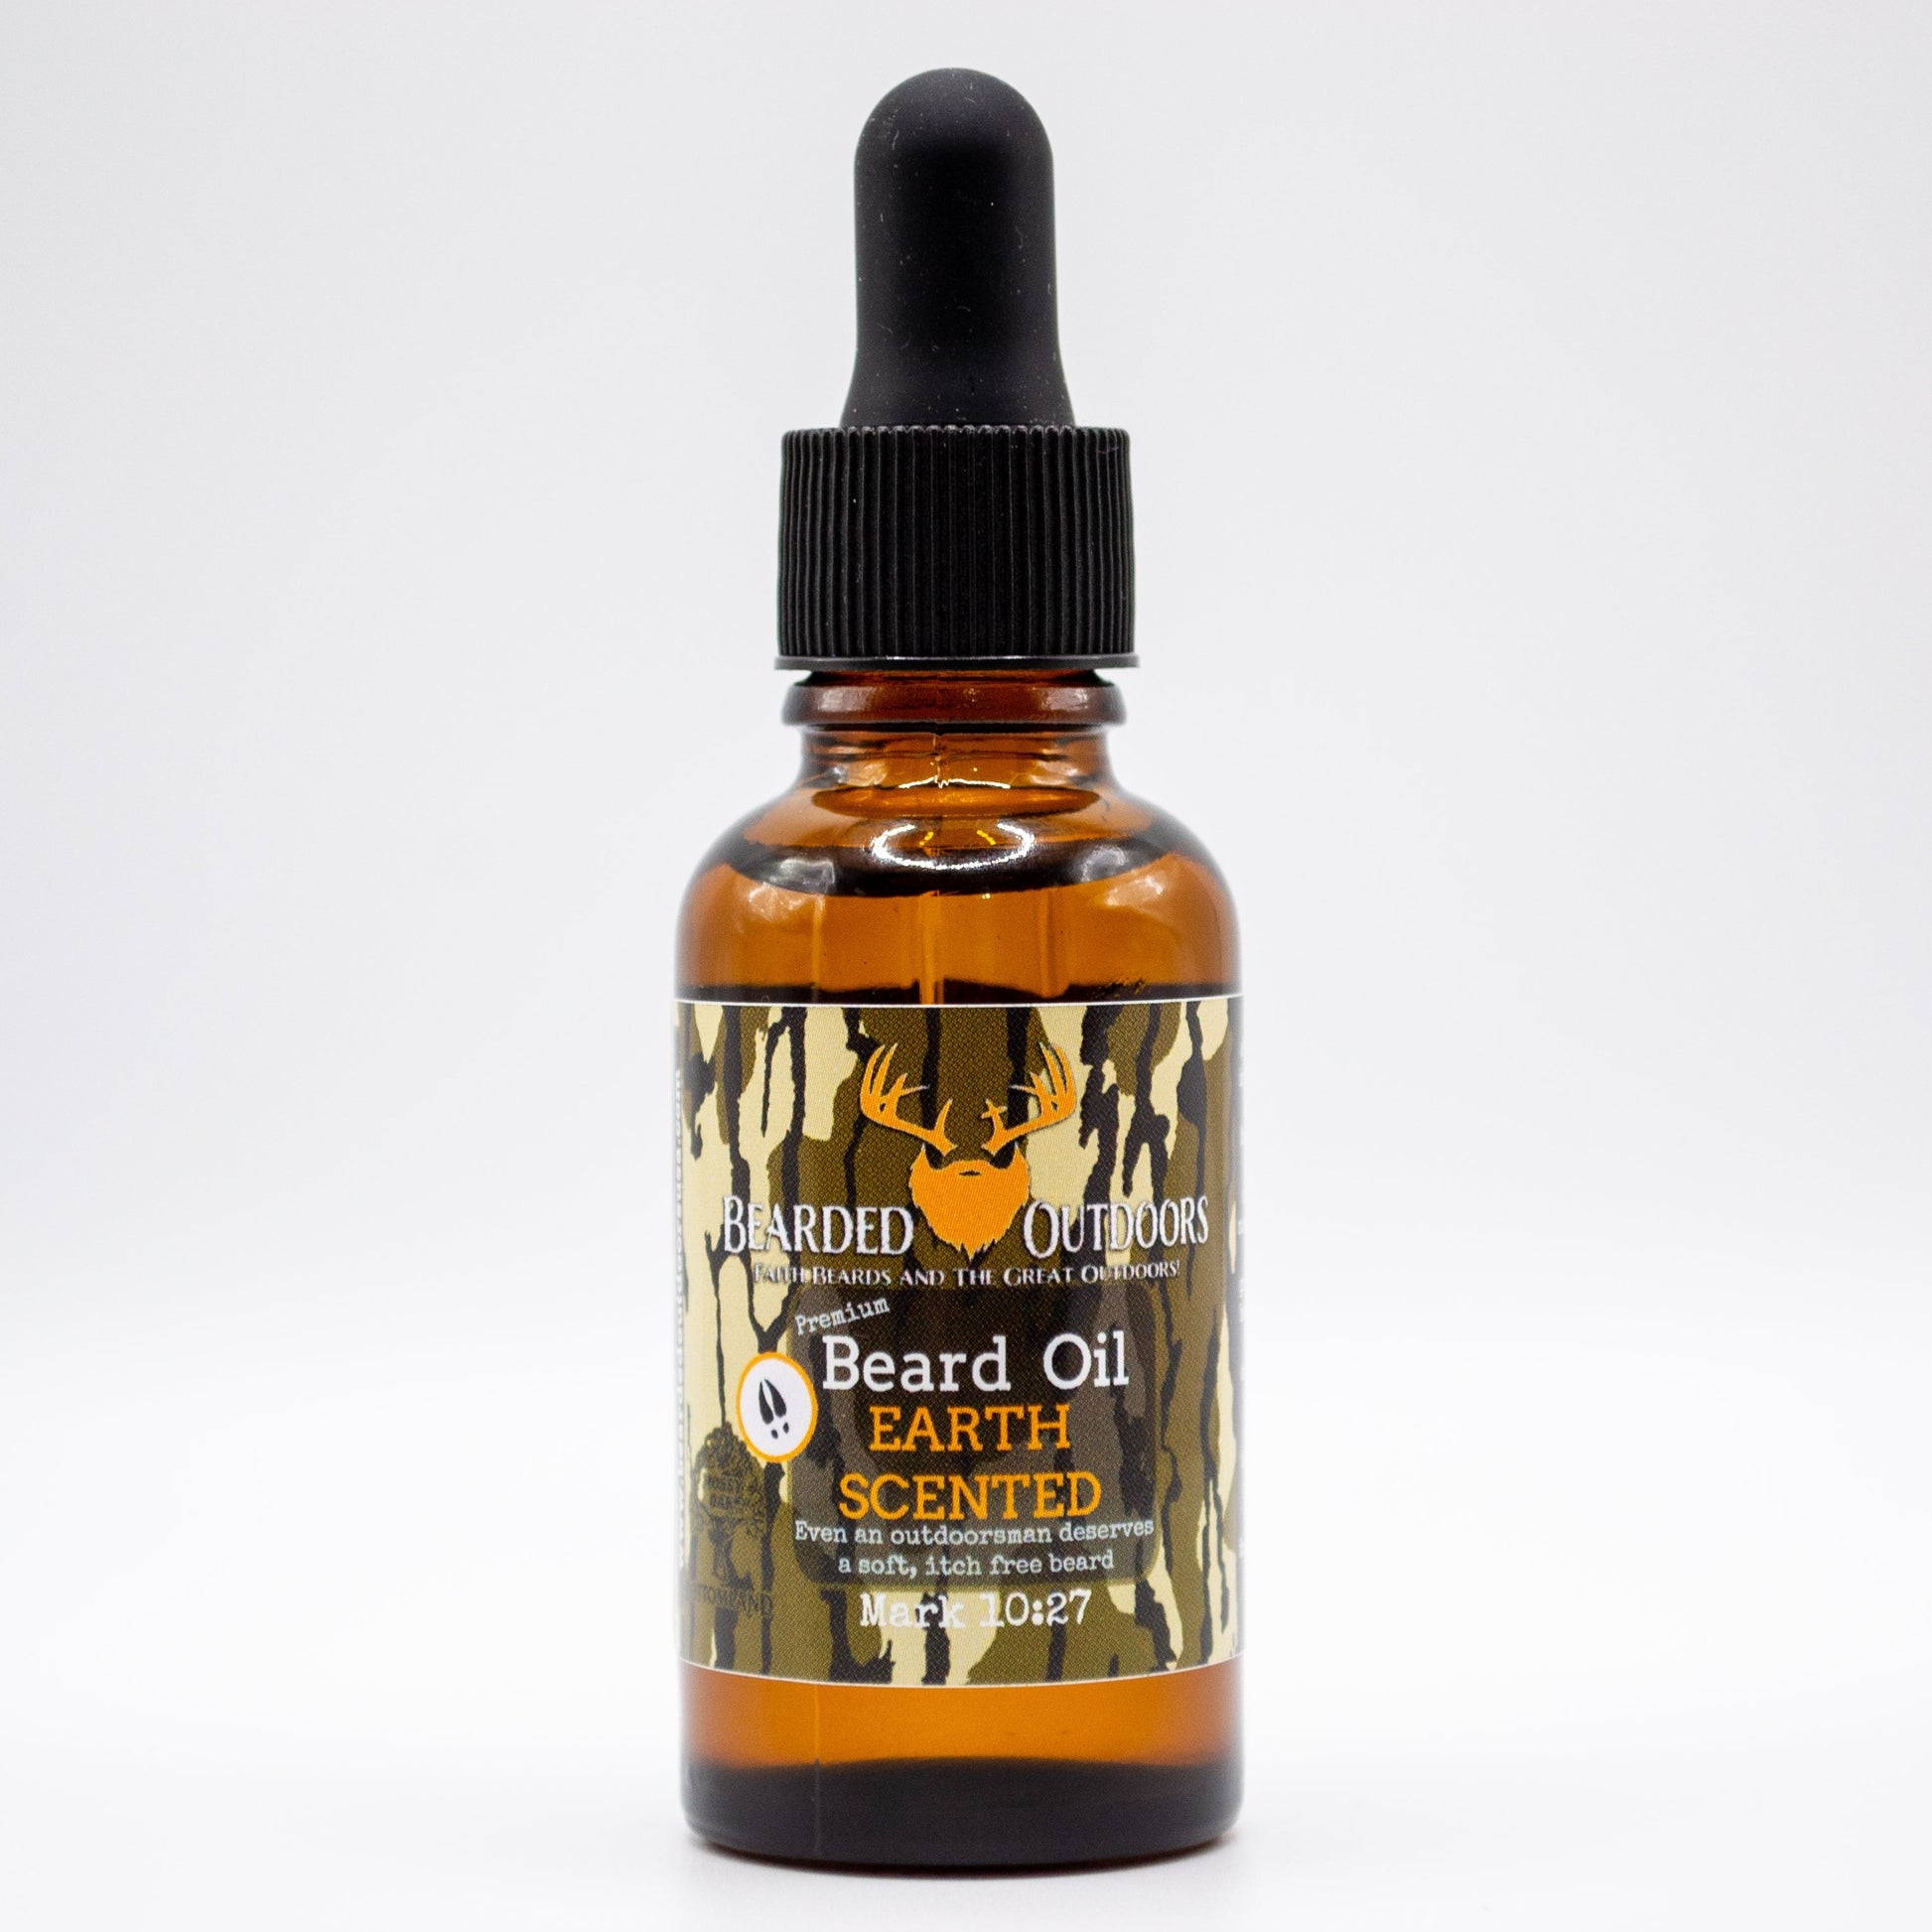 Mossy Oak Earth Scented Premium Beard Oil wrapped in Bottomland Camo by Bearded Outdoors